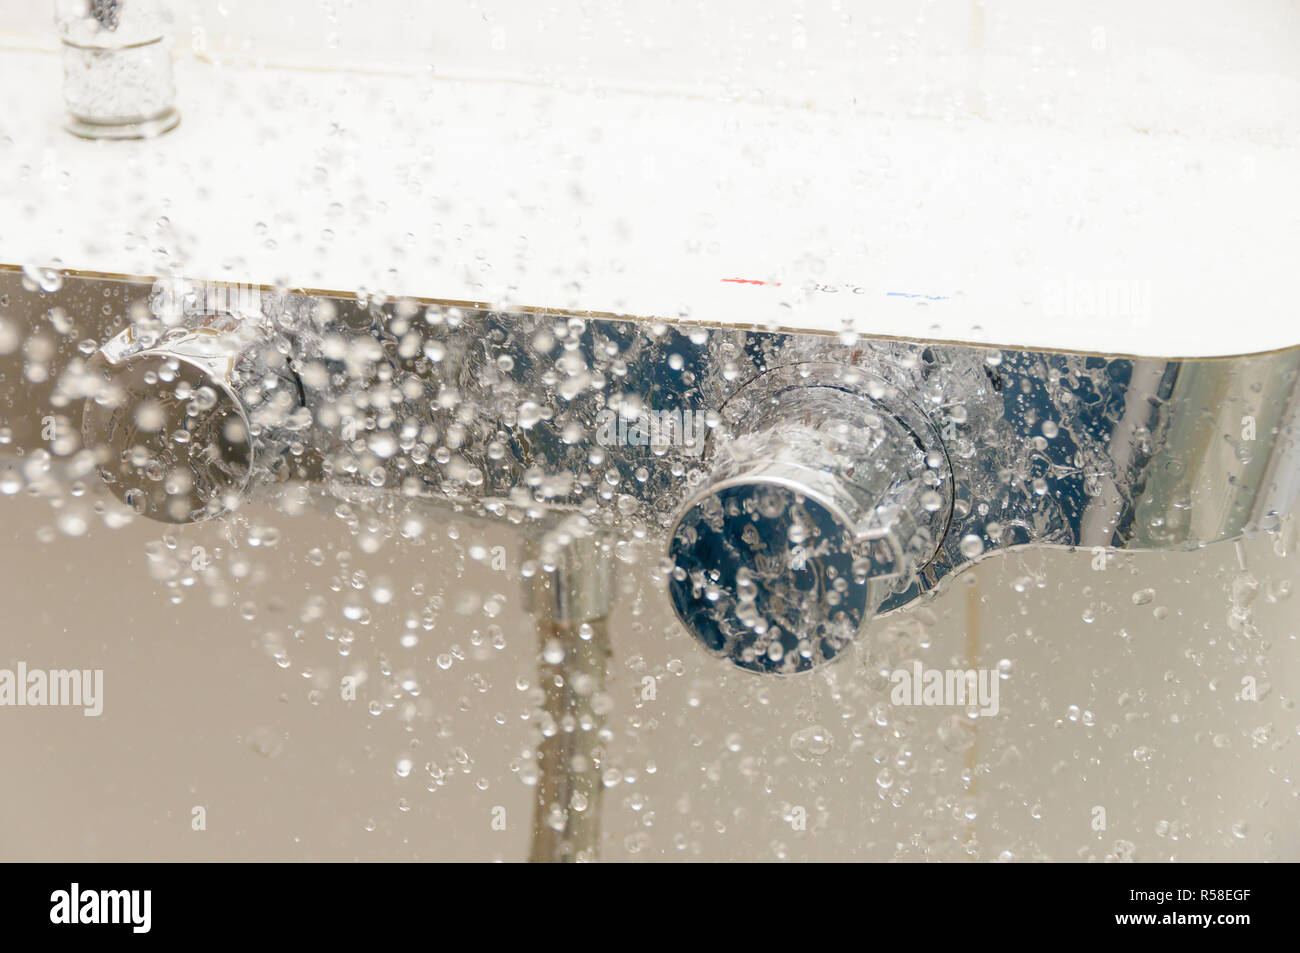 Running Water splashing out of a shower. Stock Photo